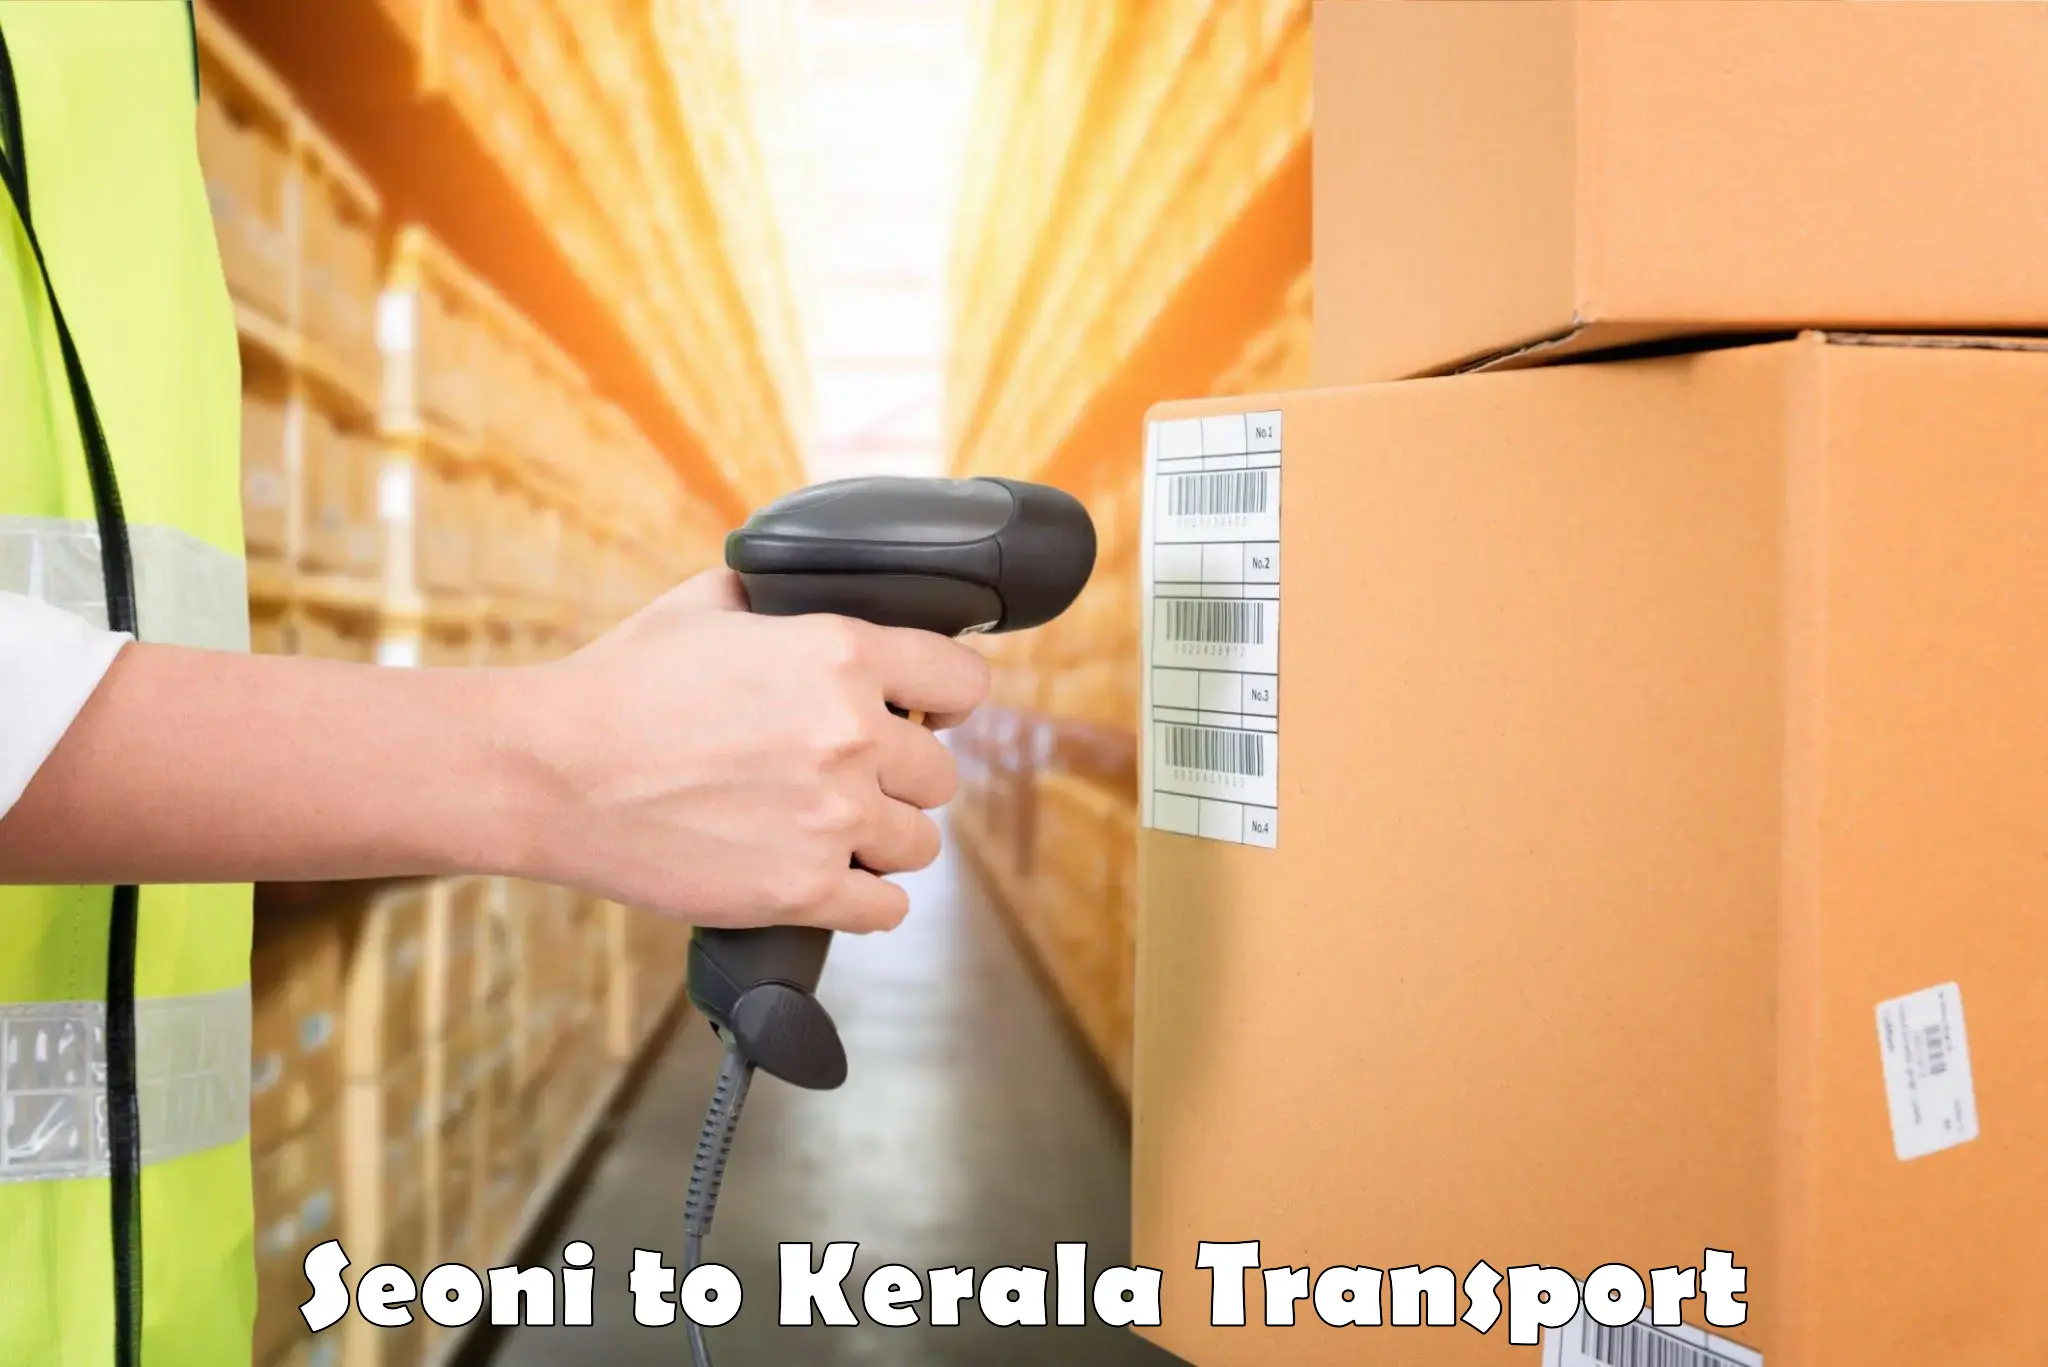 Furniture transport service Seoni to Cochin University of Science and Technology